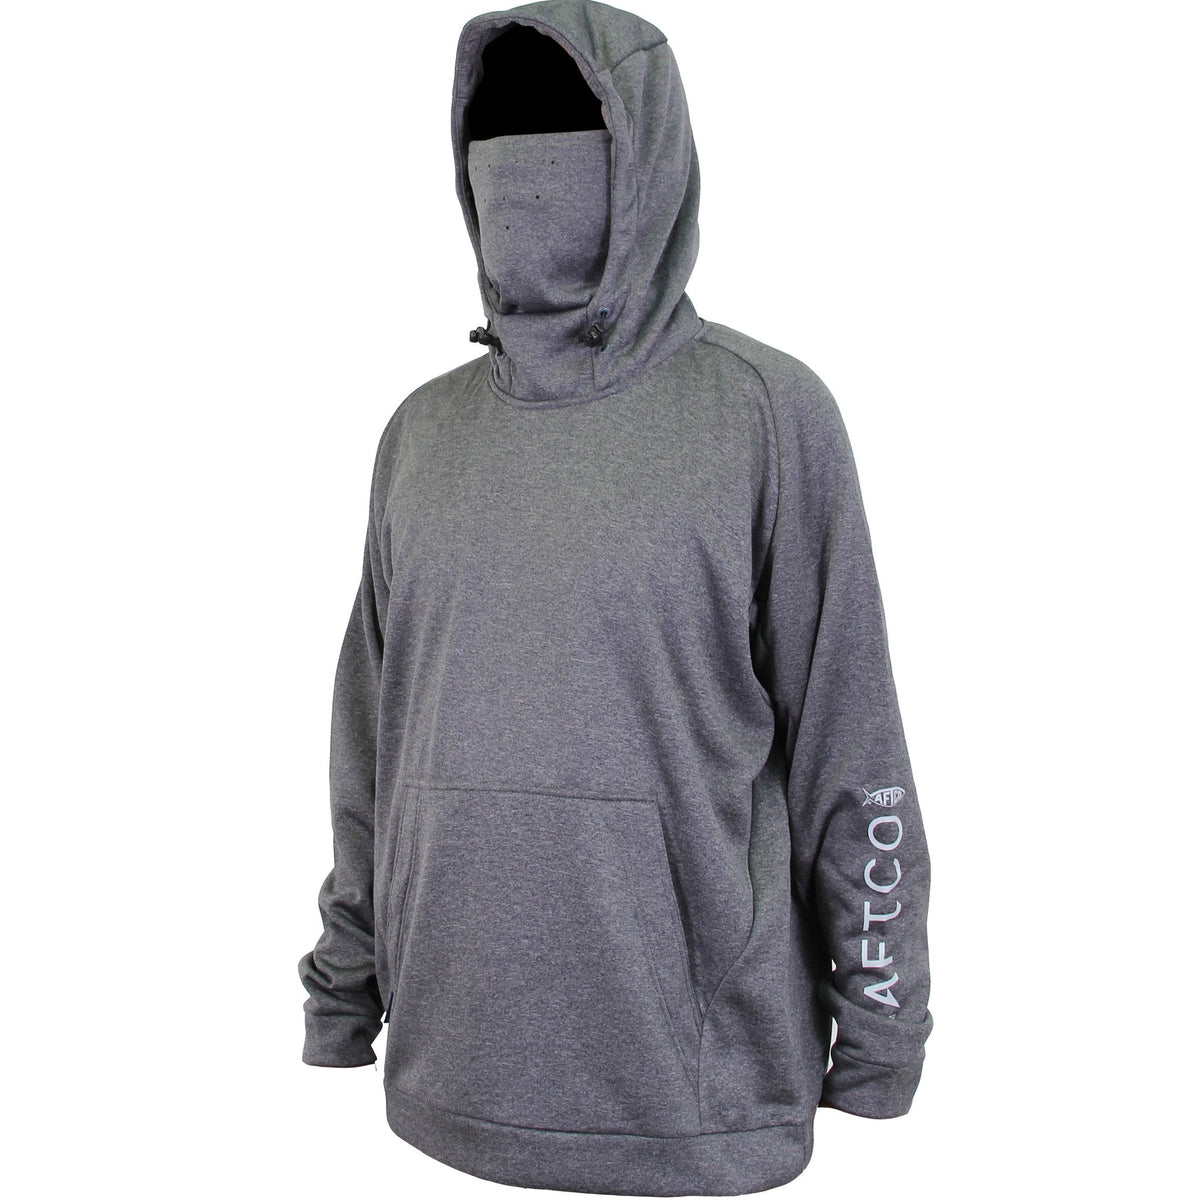 AFTCO Reaper Technical Hoodie from AFTCO - CHAOS Fishing